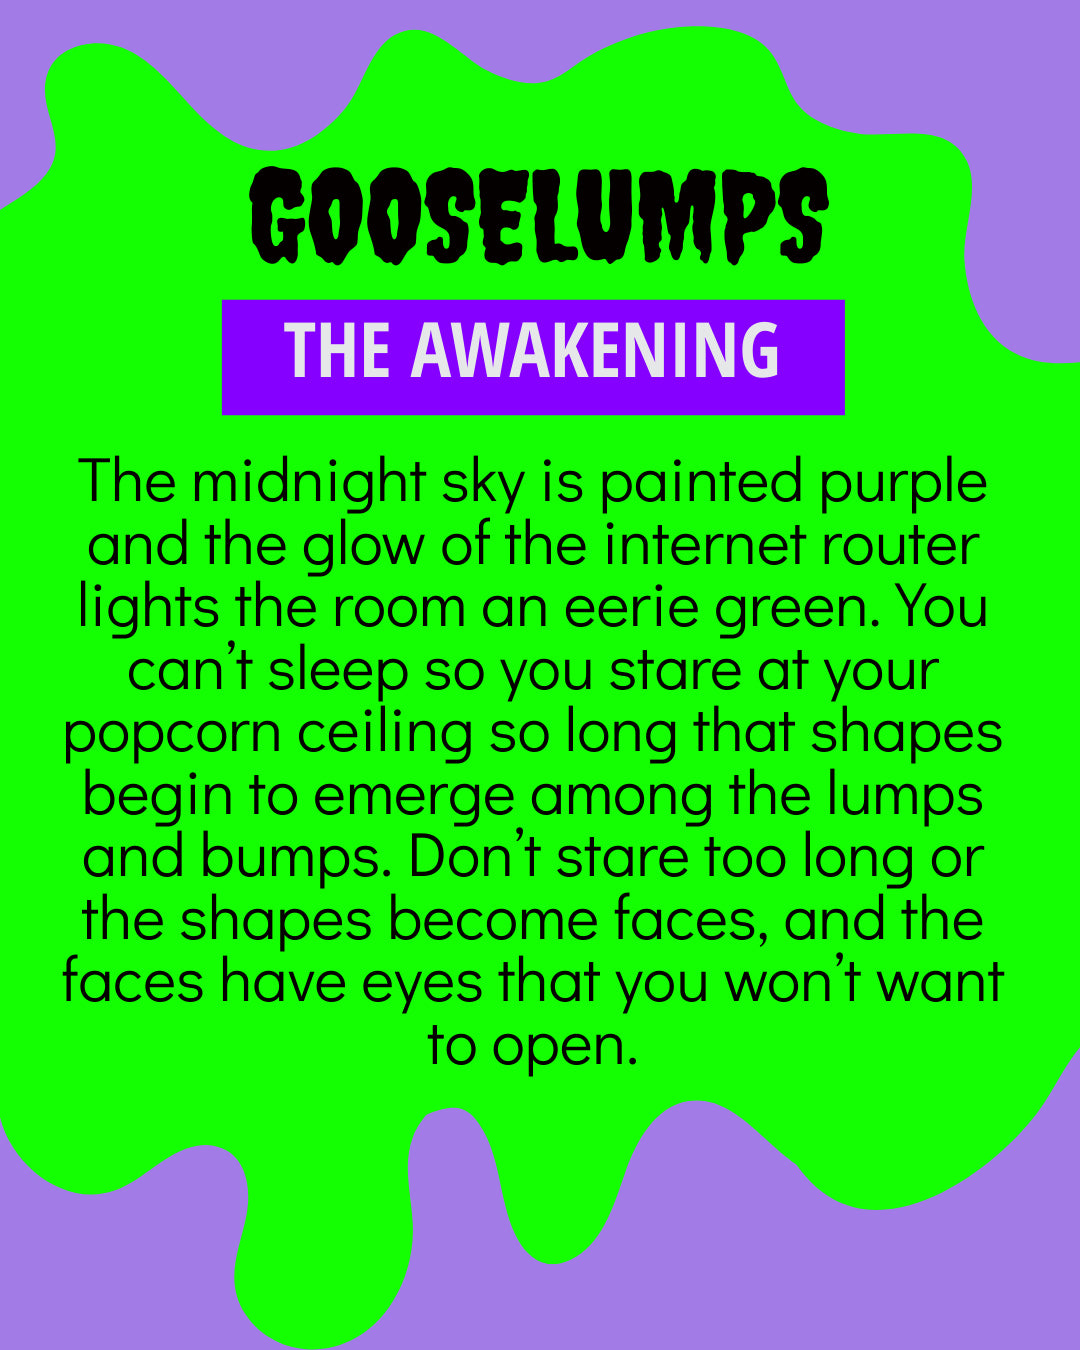 Gooselumps: The Awakening. The midnight sky is painted purple and the glow of the internet router lights the room an eerie green. You can't sleep so you stare at your popcorn ceiling so long that shapes begin to emerge among the lumps and bumps. Don't stare too long or the shapes become faces, and the faces have eyes that you won't want to open.